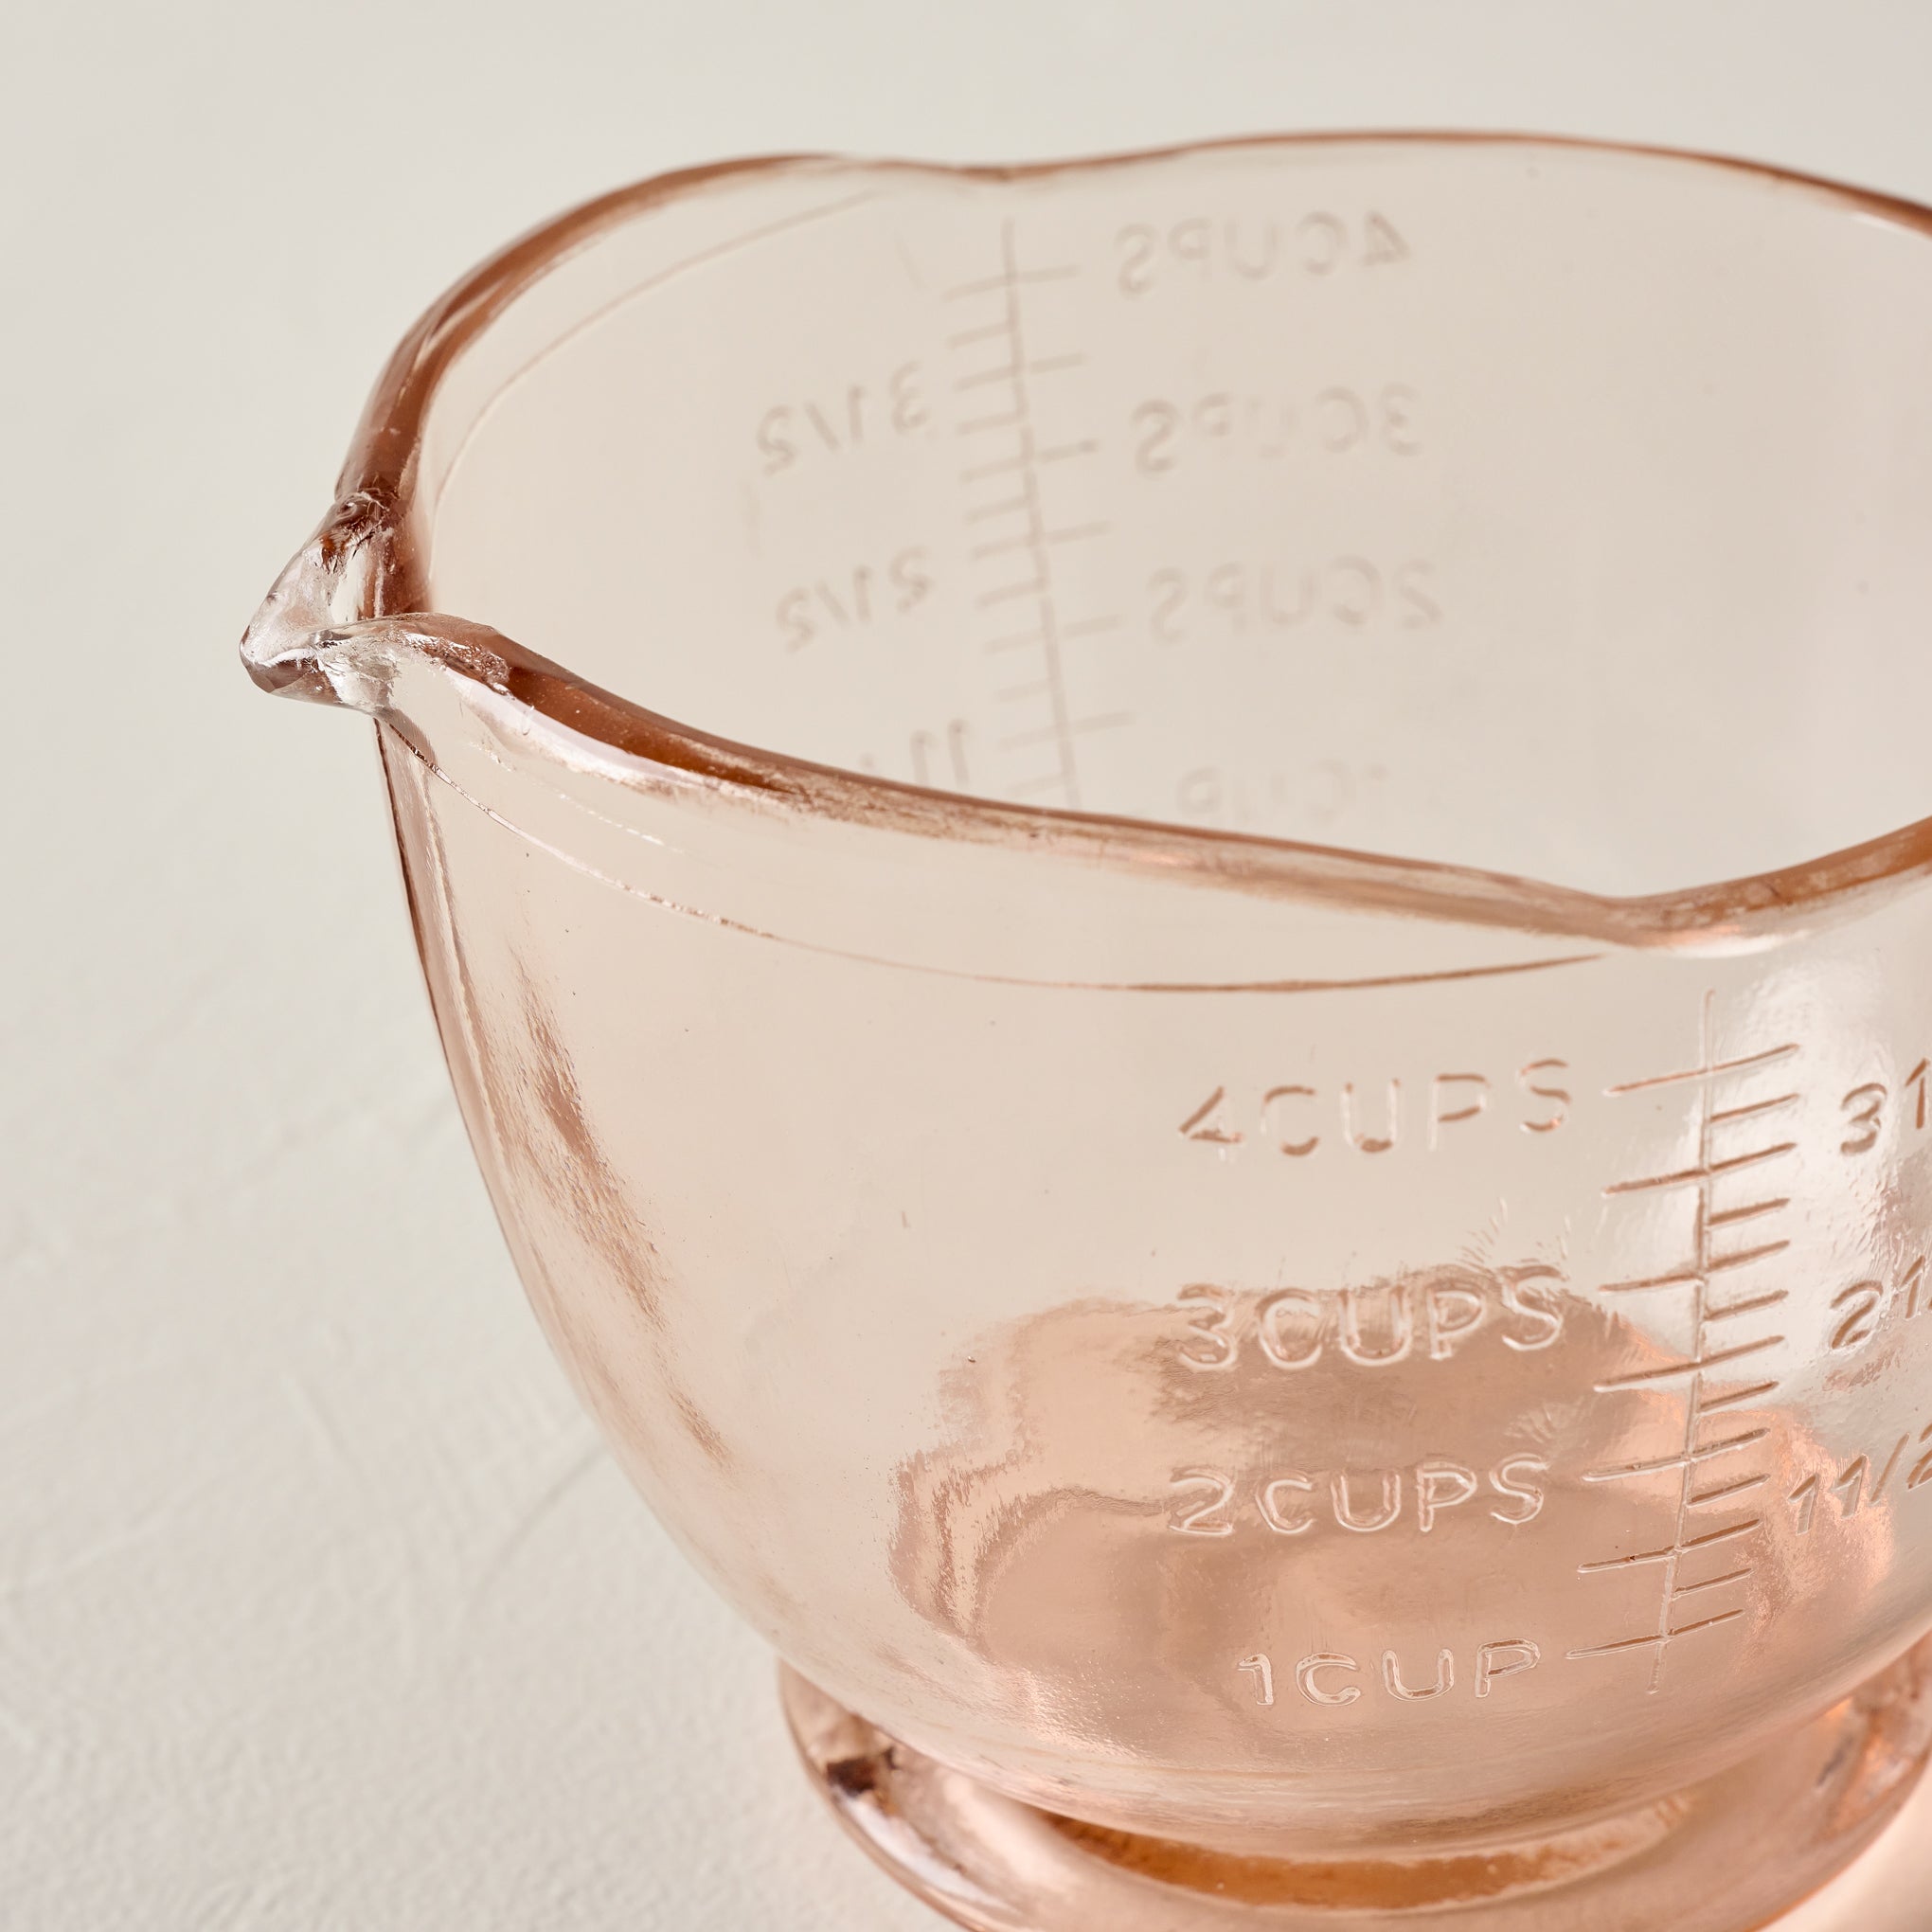 4 Cup Measuring Cup - Original – Capital Books and Wellness